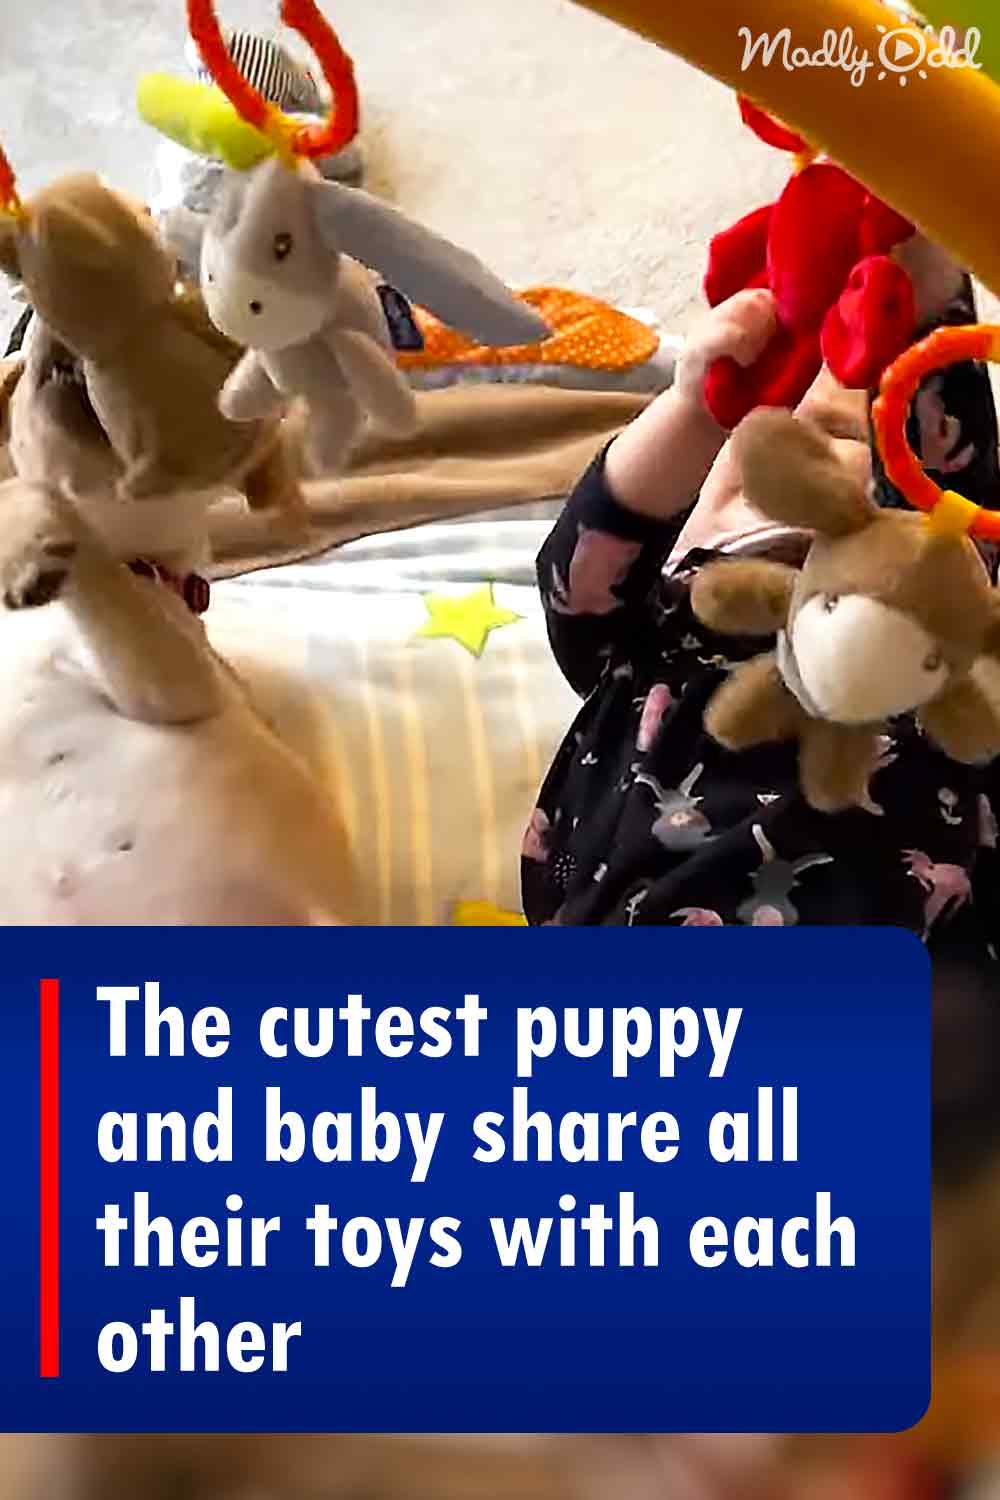 The cutest puppy and baby share all their toys with each other